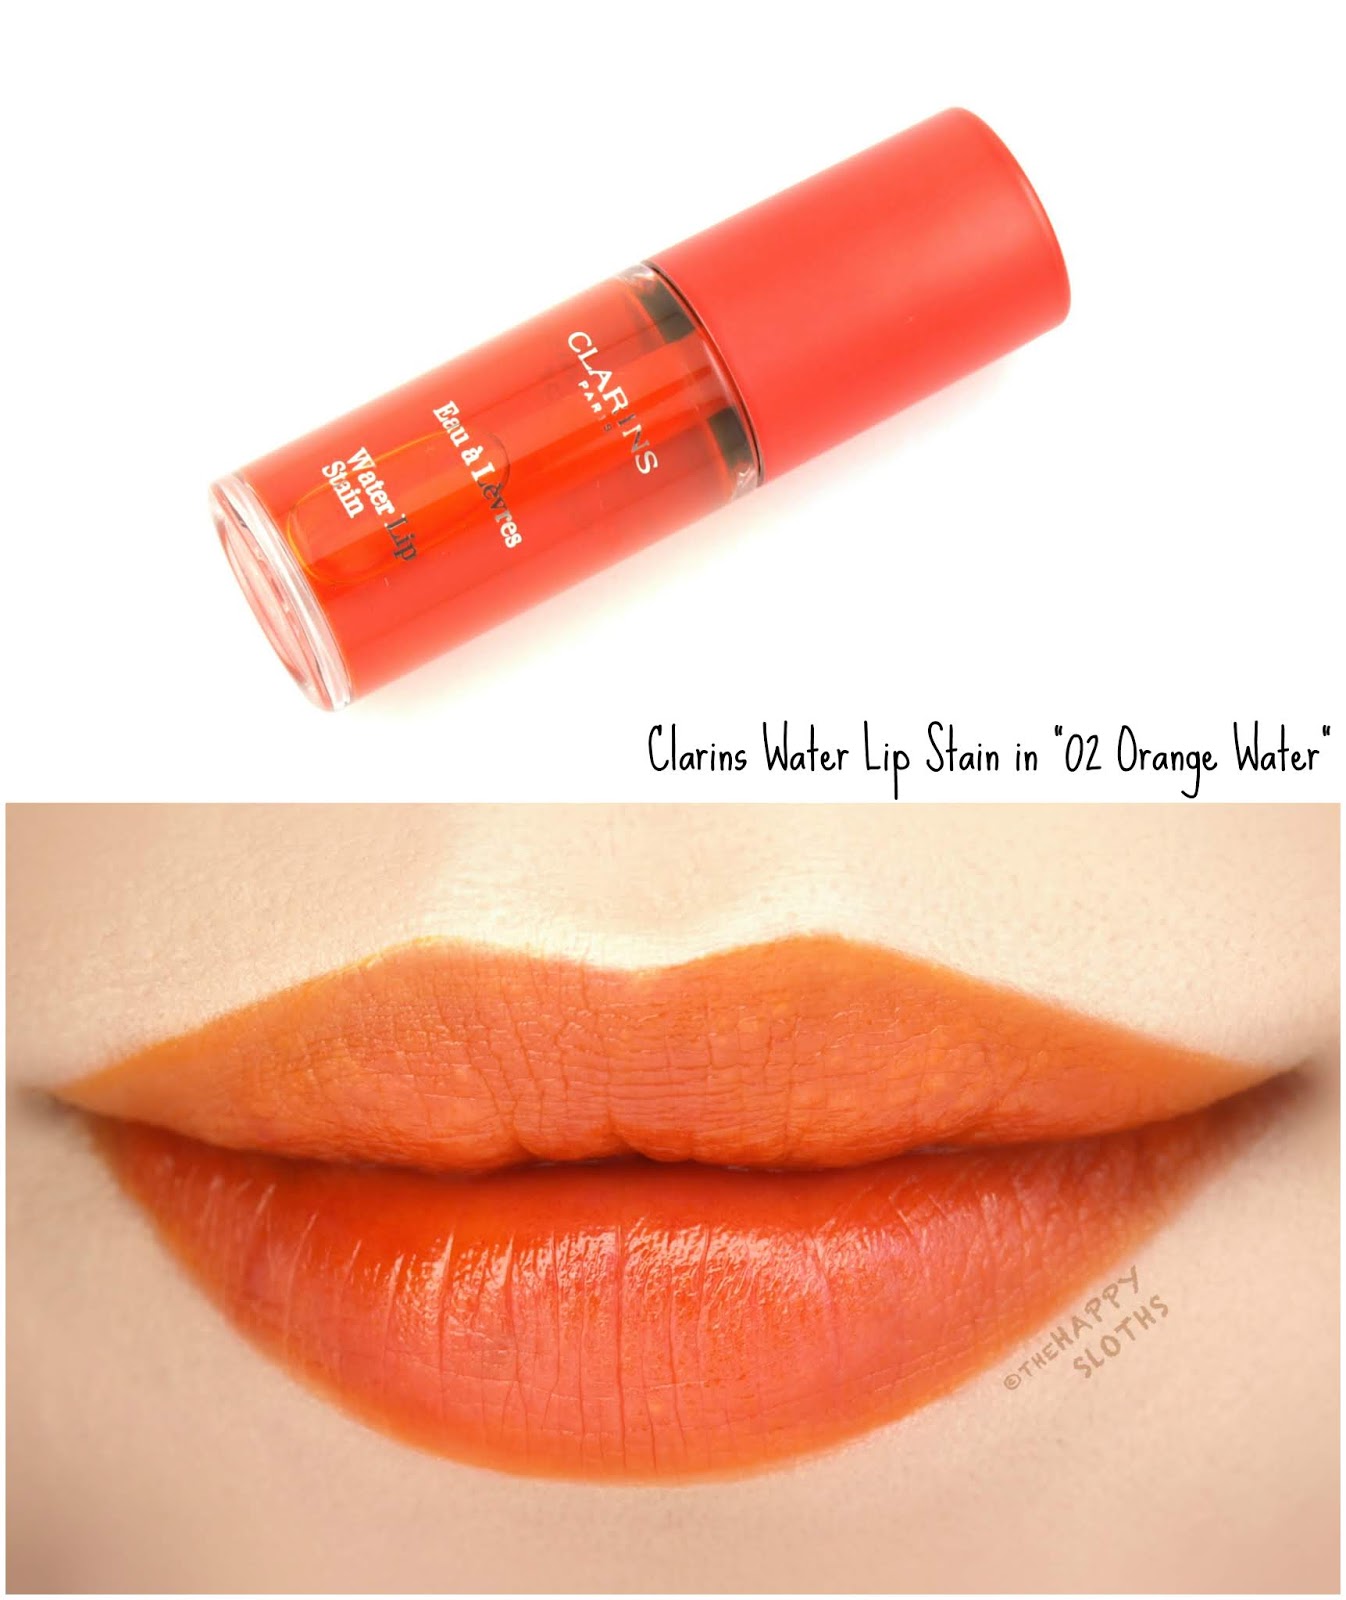 Clarins | Water Lip Stain in "02 Orange Water": Review and Swatches